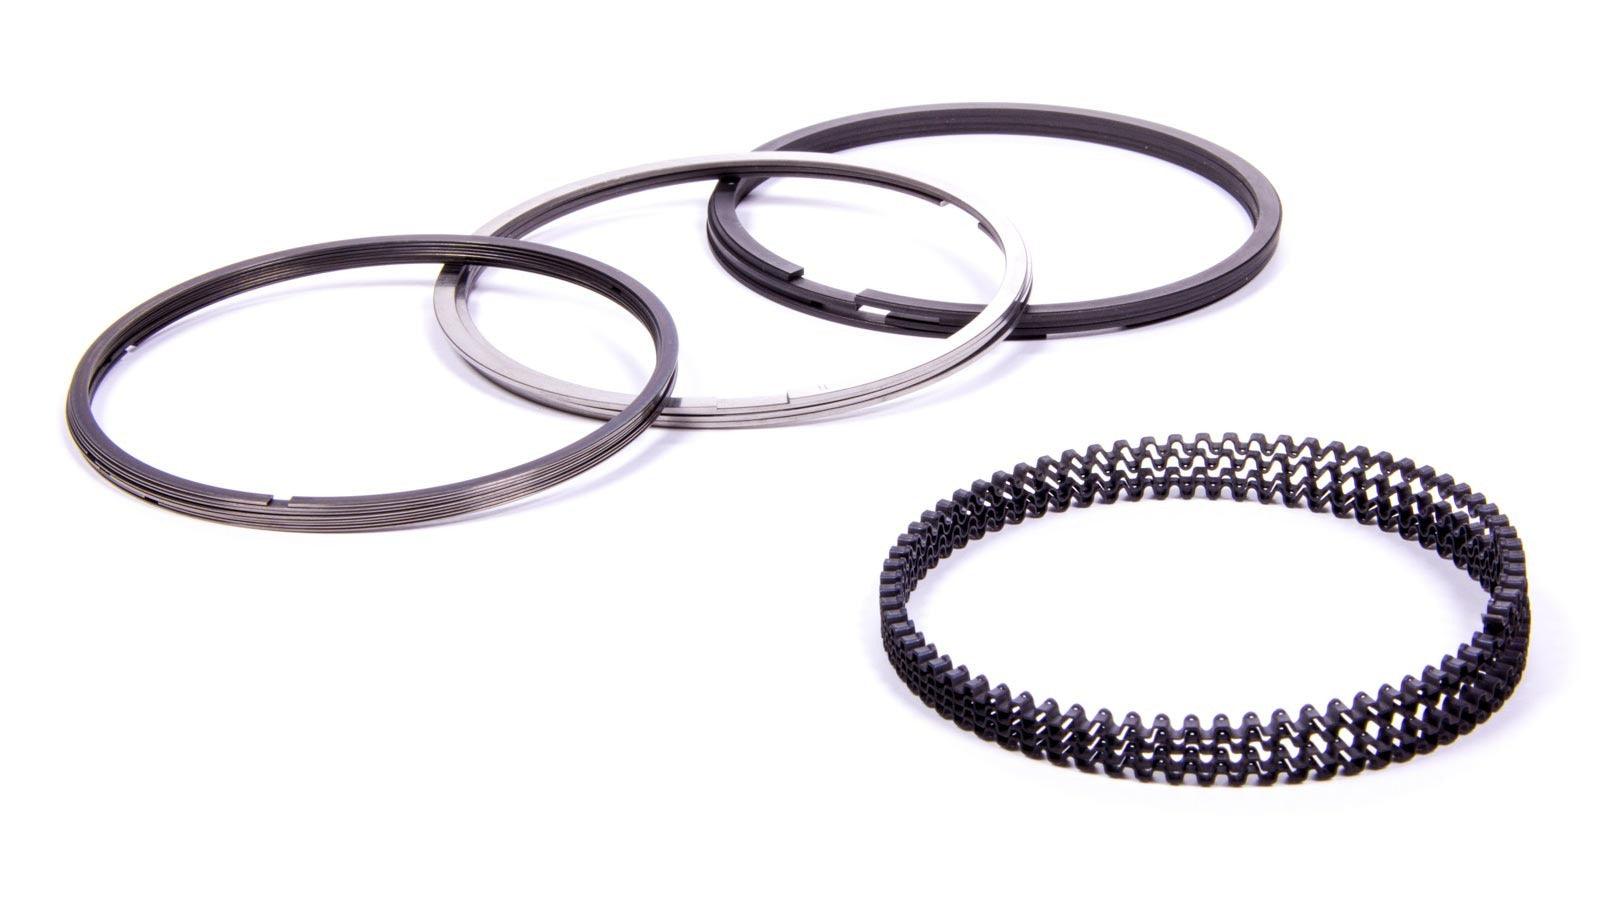 Piston Ring Set 3.209 1.0 1.2 2.8mm 4 cyl - Burlile Performance Products